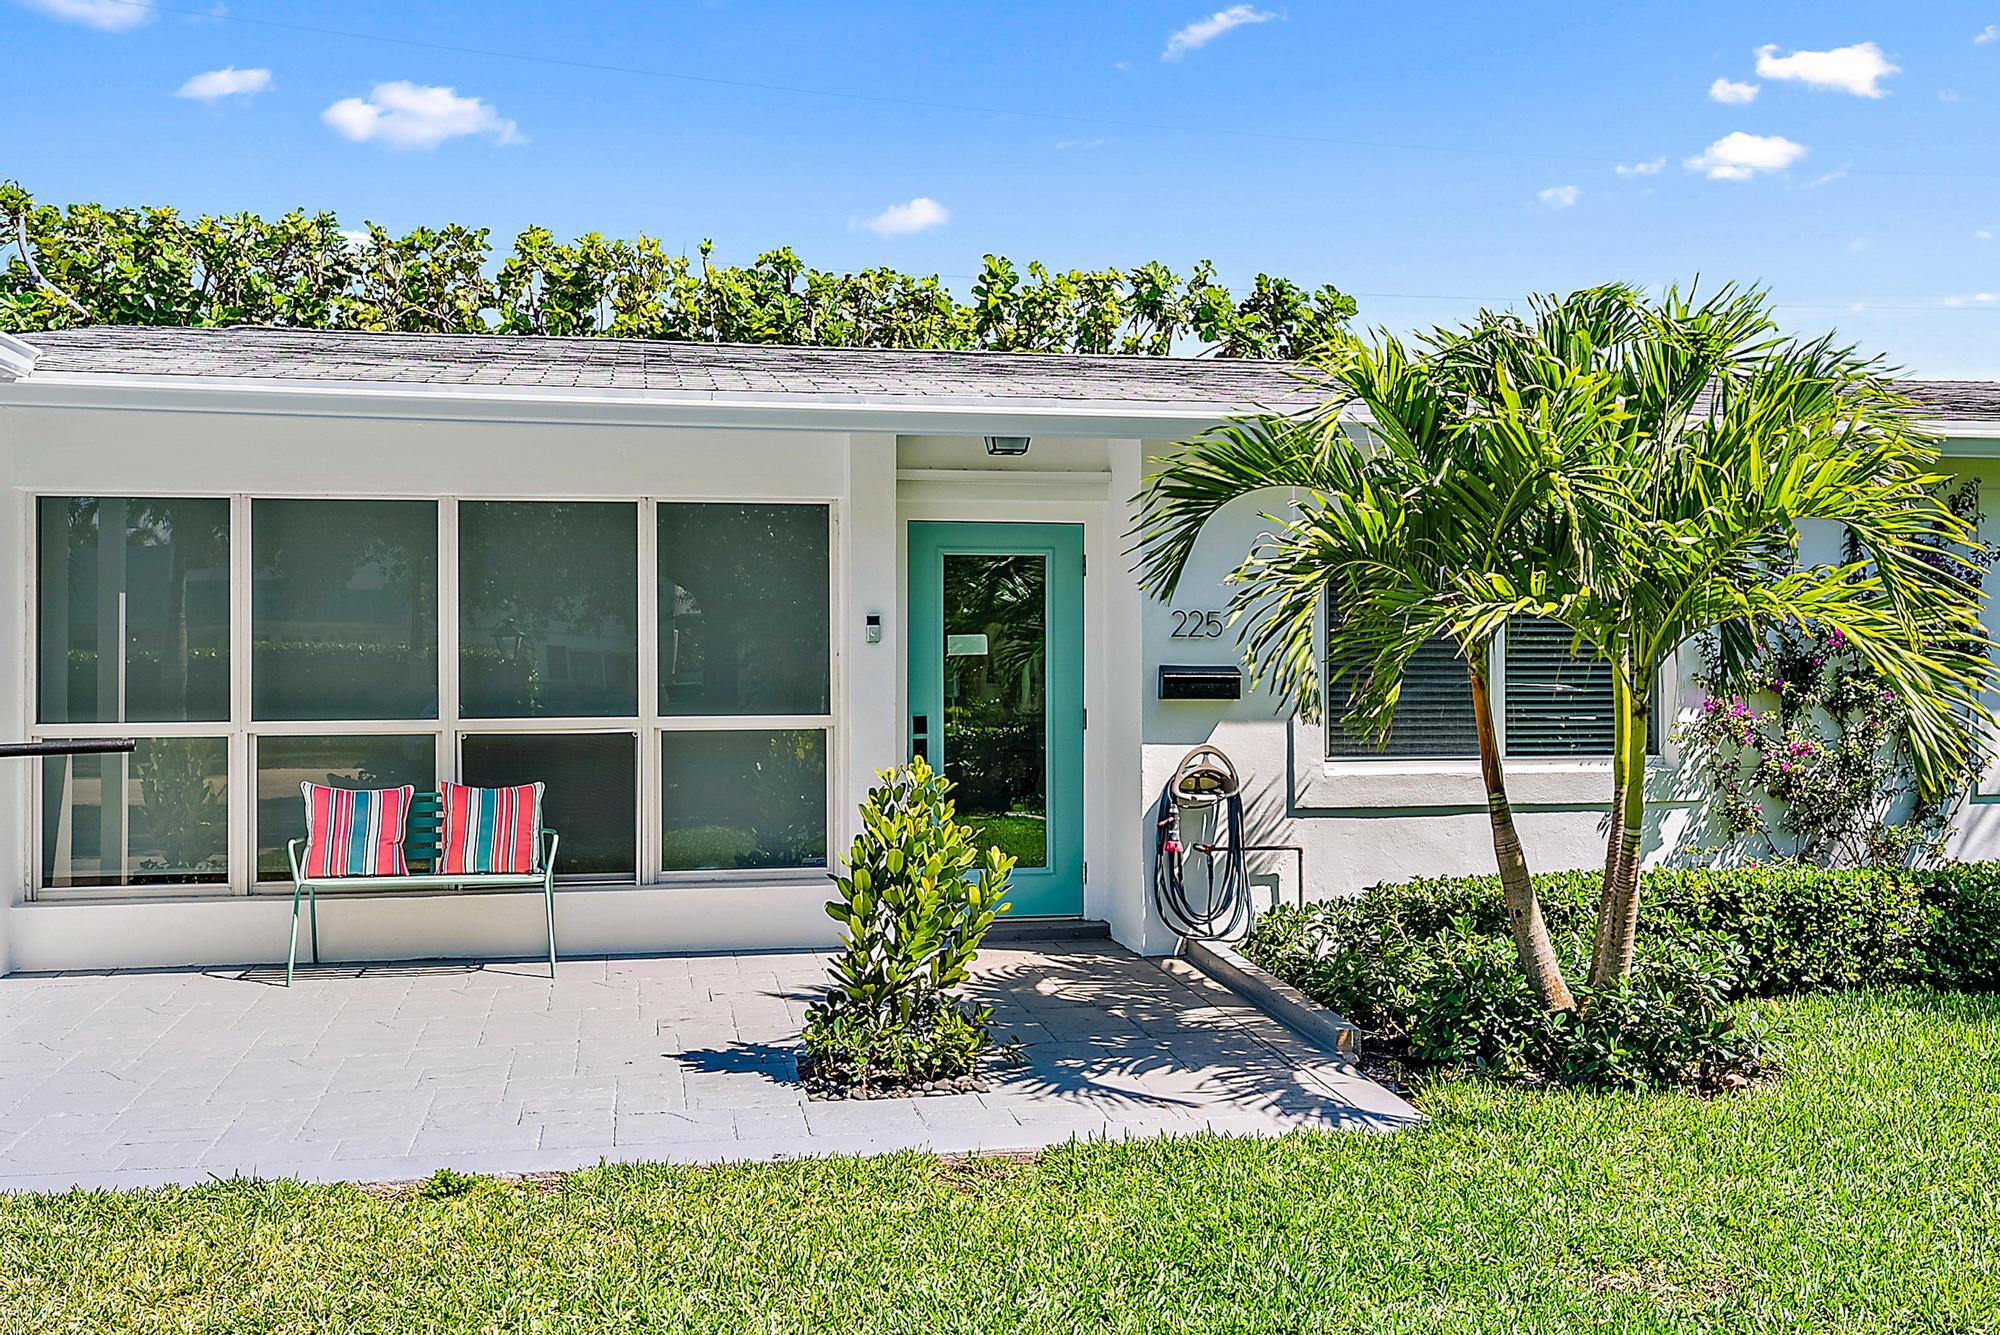 225 Gregory Road, West Palm Beach, Palm Beach County, Florida - 4 Bedrooms  
2 Bathrooms - 